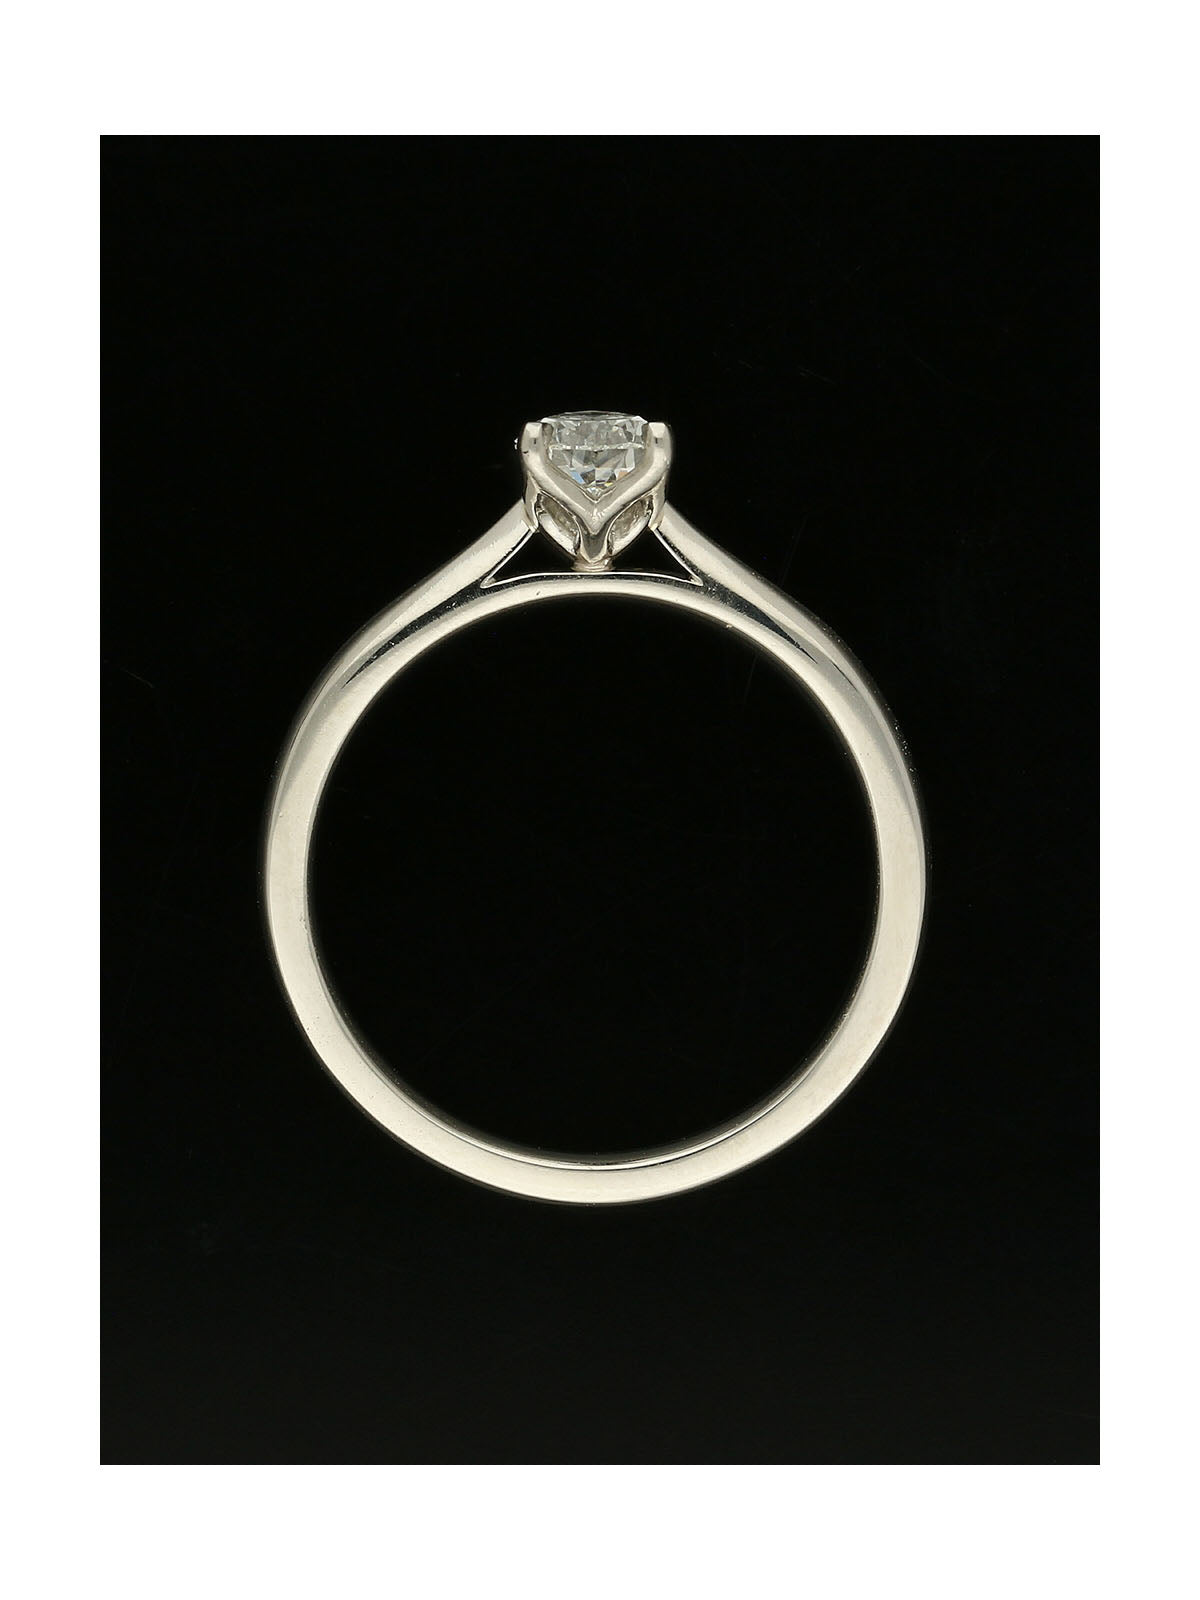 Diamond Solitaire Engagement Ring 0.50ct Certificated Pear Cut in Platinum